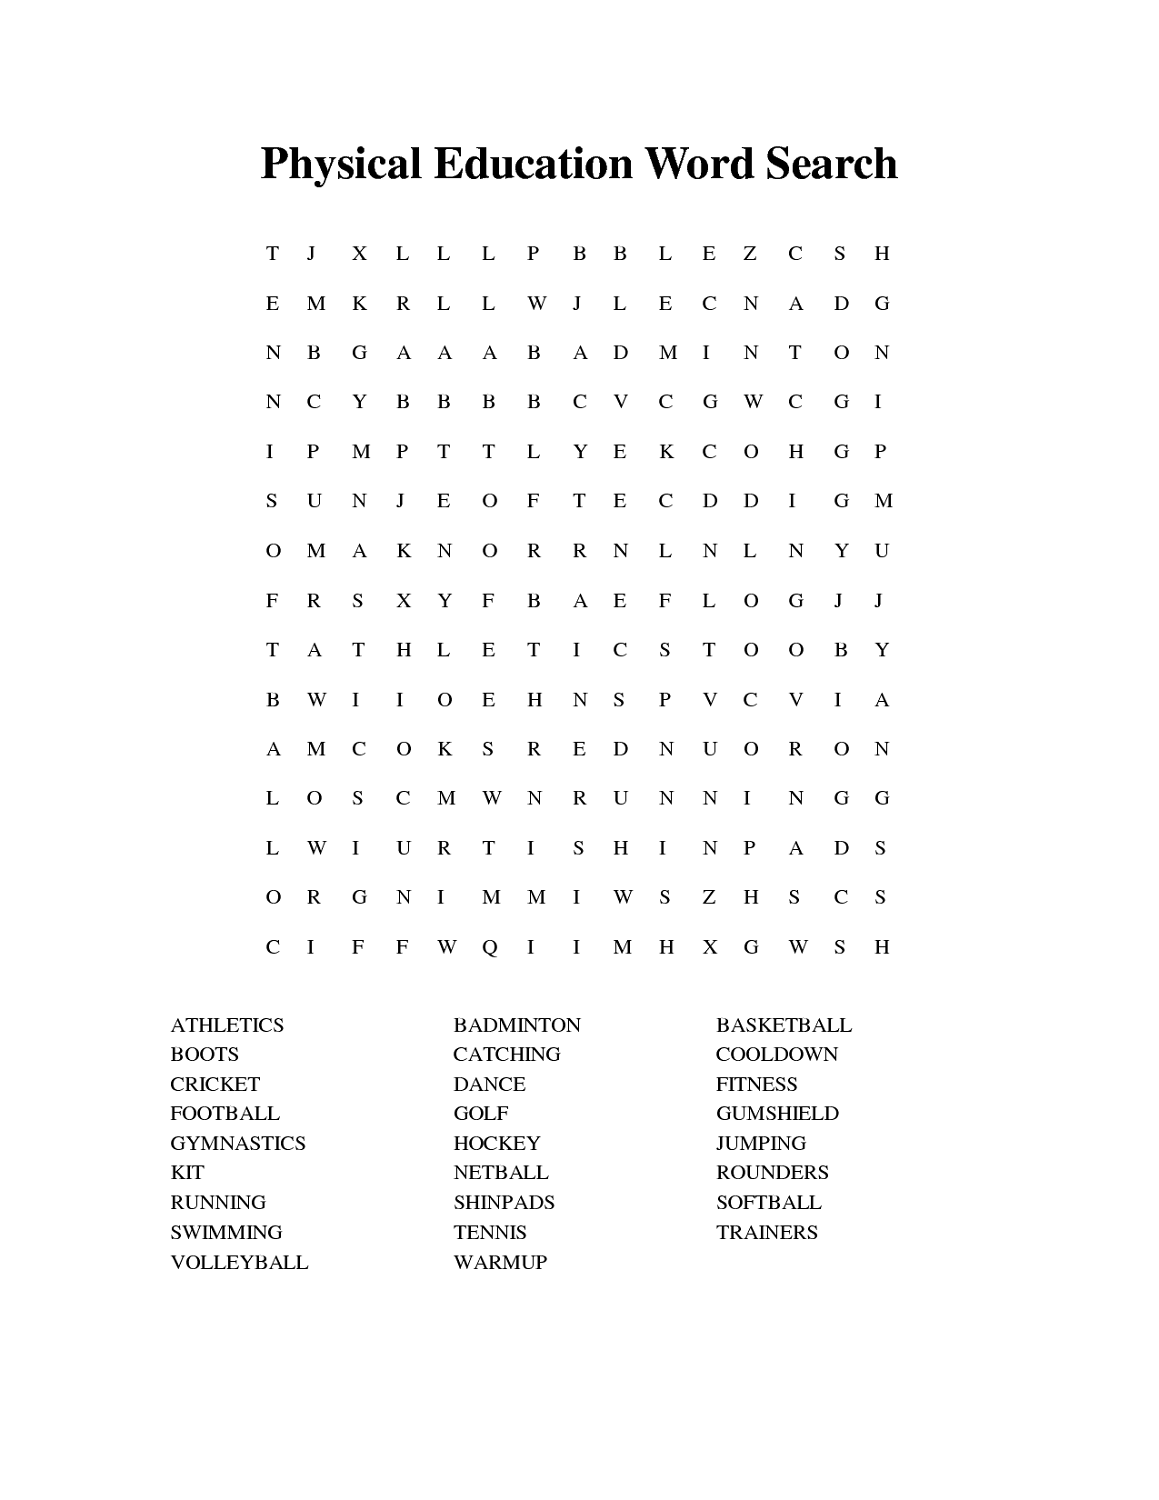 word-search-sports-physical